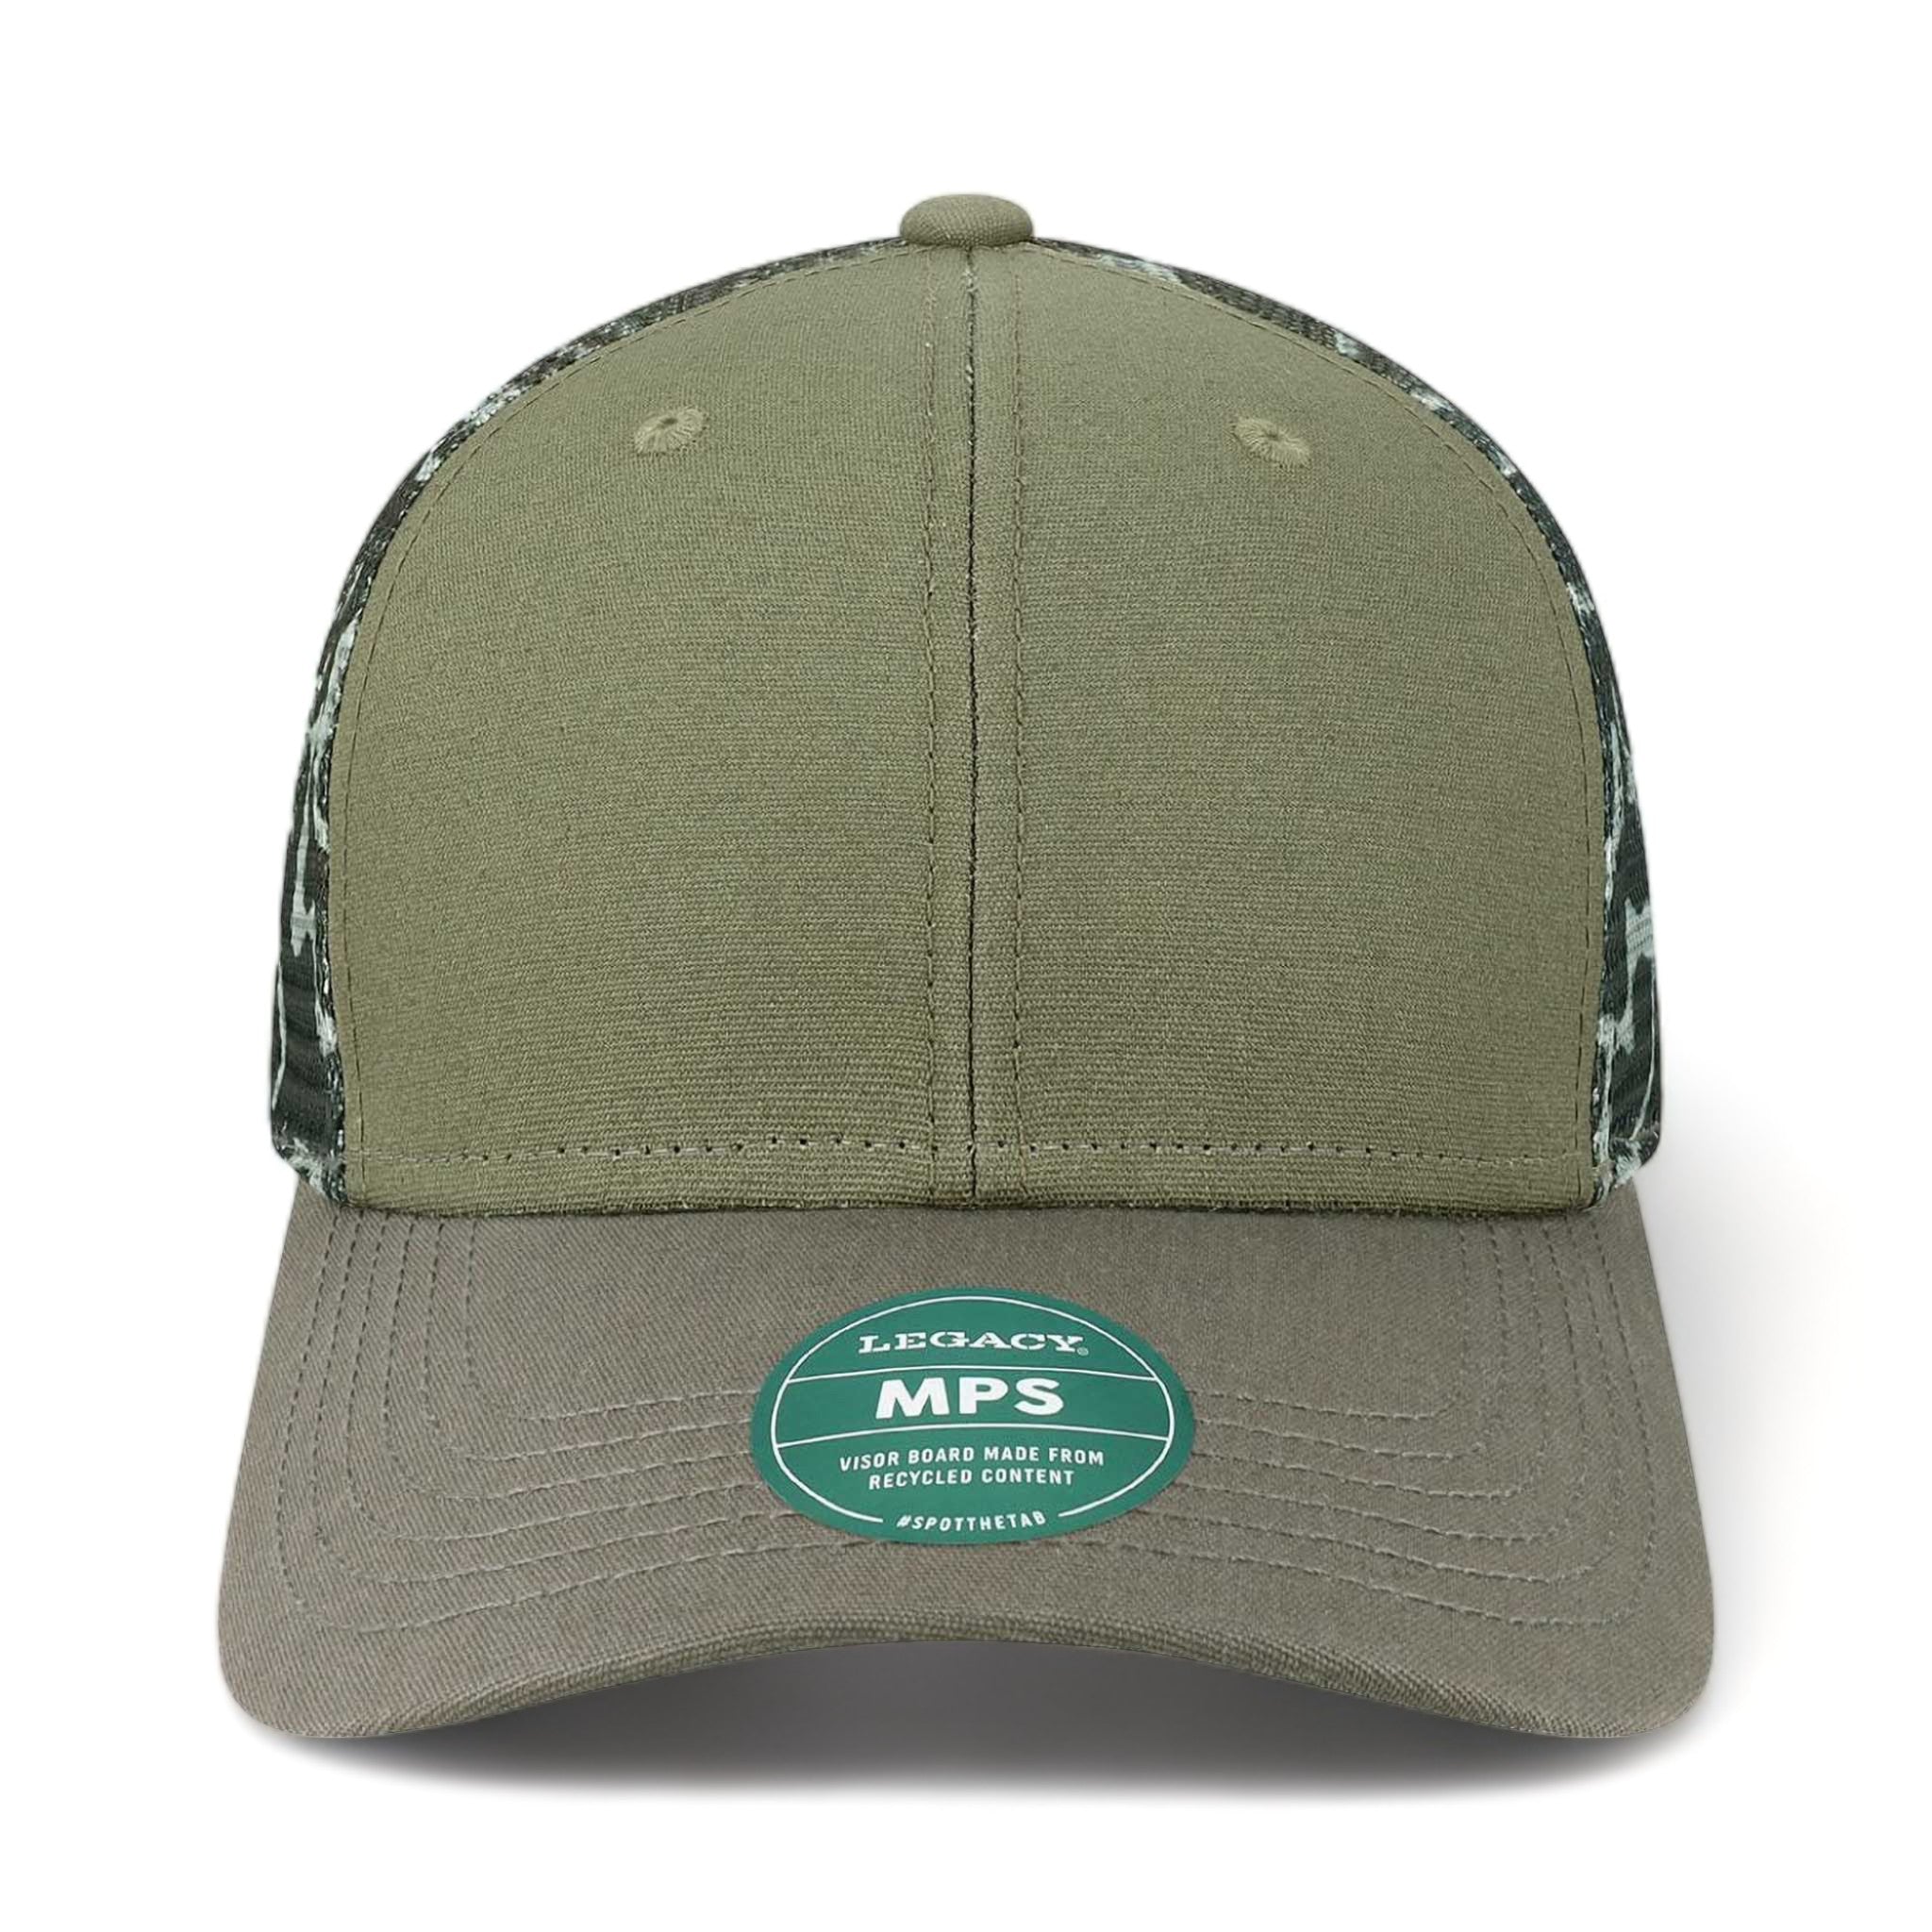 Front view of LEGACY MPS custom hat in olive, grey and grey camo